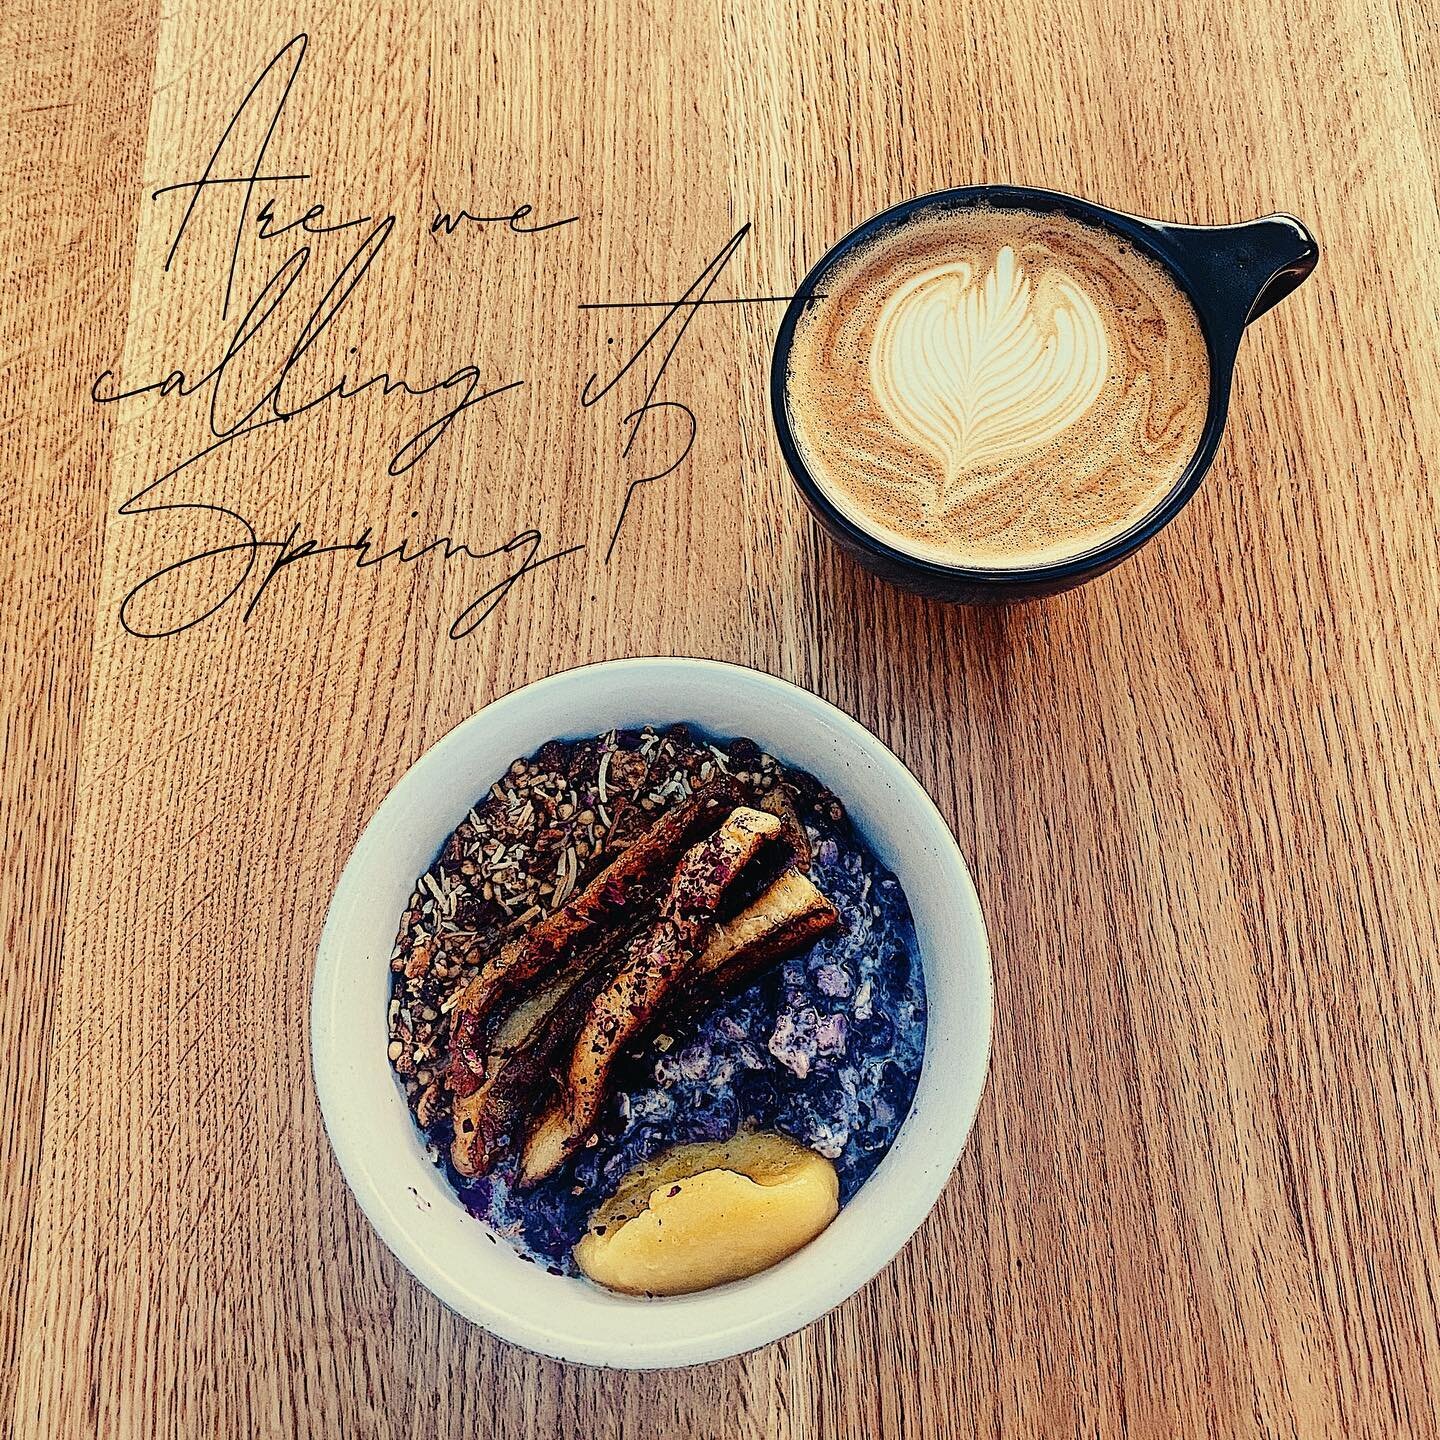 Awesome to see the patio hopping over the weekend, tank tops and flip flops were spotted.. wtf!
.
.
Bircher is how the Swiss do breakfast and it&rsquo;s a shockingly good way to start the day.
.
Our take is oats and chia seeds soaked overnight in app